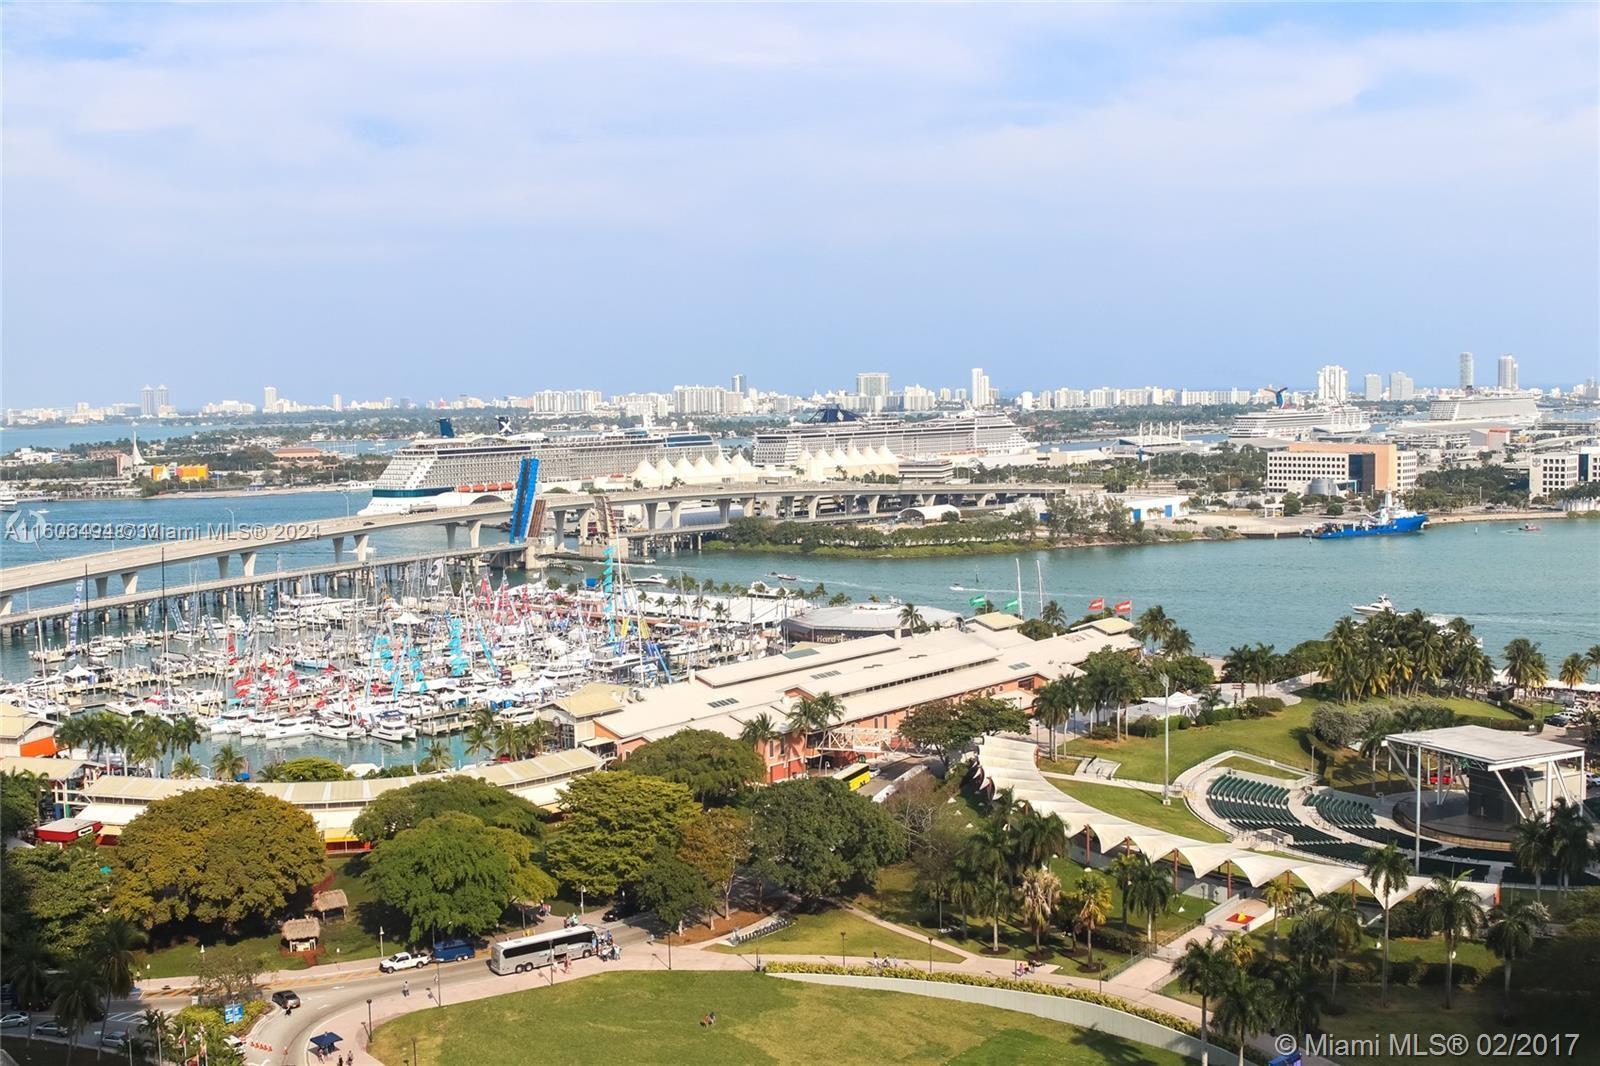 Vizcayne South is a modern, elegant & prestigious location in Biscayne Bay. This Private CornerUnit (1,363 ft, 128 mtrs). Absolutely stunning views of Biscayne Views, 2 Amazing Balconies in this 2 Bedrooms + Den converted into a 3rd Bedroom. Title Floors make it easy to clean, and electric blackouts & privacy shades are installed. This Bldg offers luxury Five stars amenities (15,000 Sq Ft): Spa, Sauna, Steam Room, 4 heated pools, outdoor and indoor Jacuzzi, Gym, Fitness Classes 6 times/week, Club House, 2 Business Centers & 3 Conference Rooms, Sundeck, Good for investors you can rent 12 times a year/ Rented until Nov  30th $4,200.-